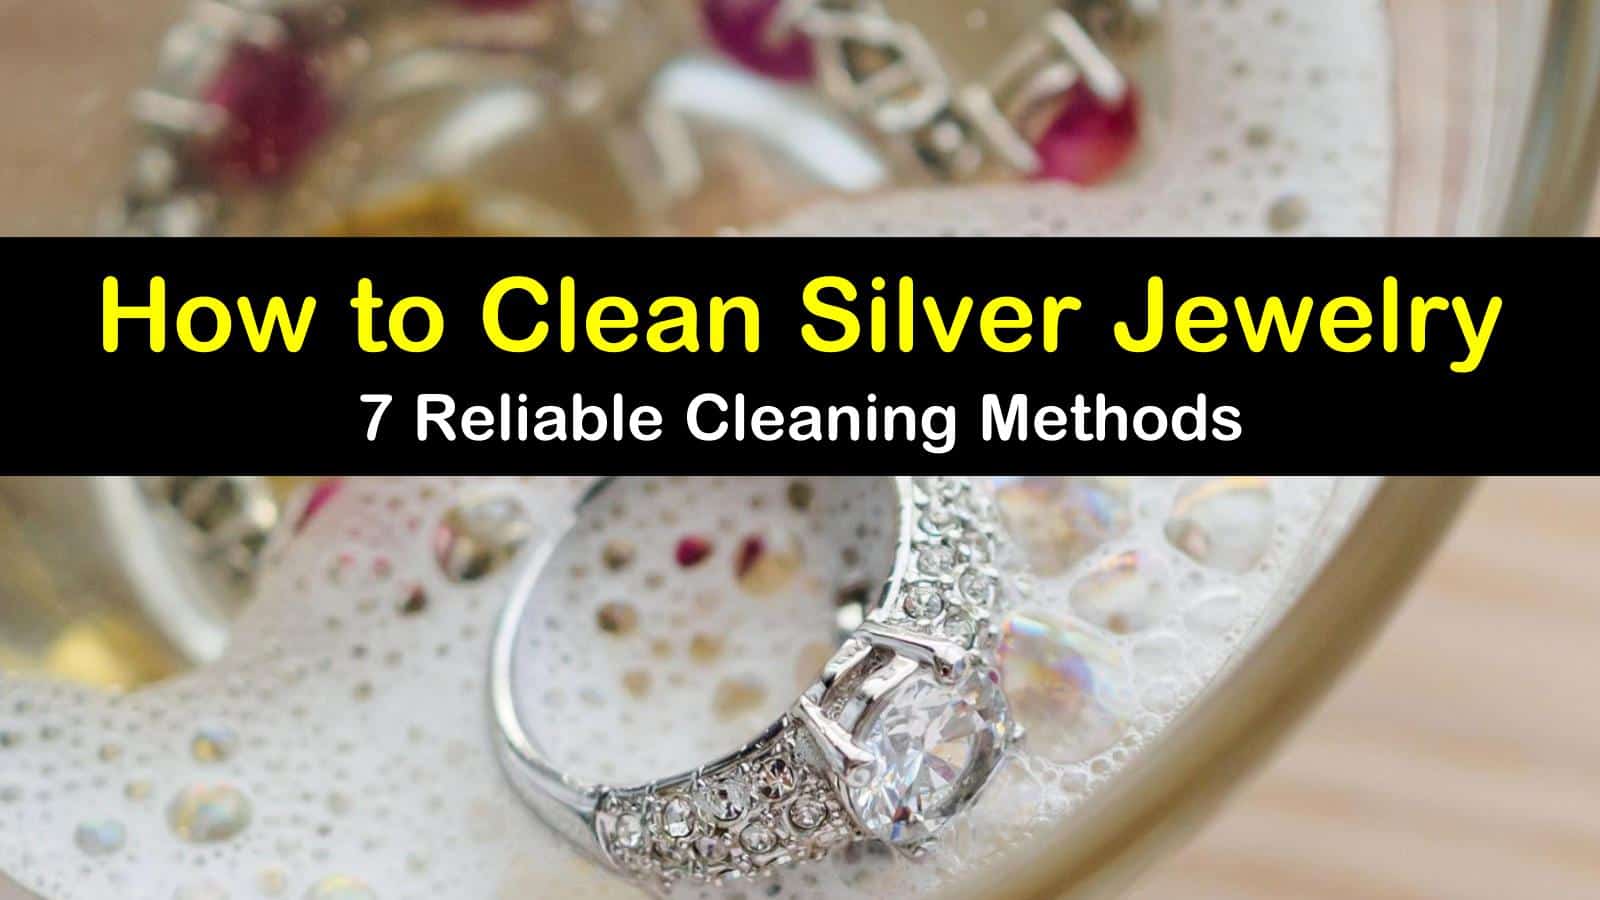 15 Reliable Ways to Clean Silver Jewelry